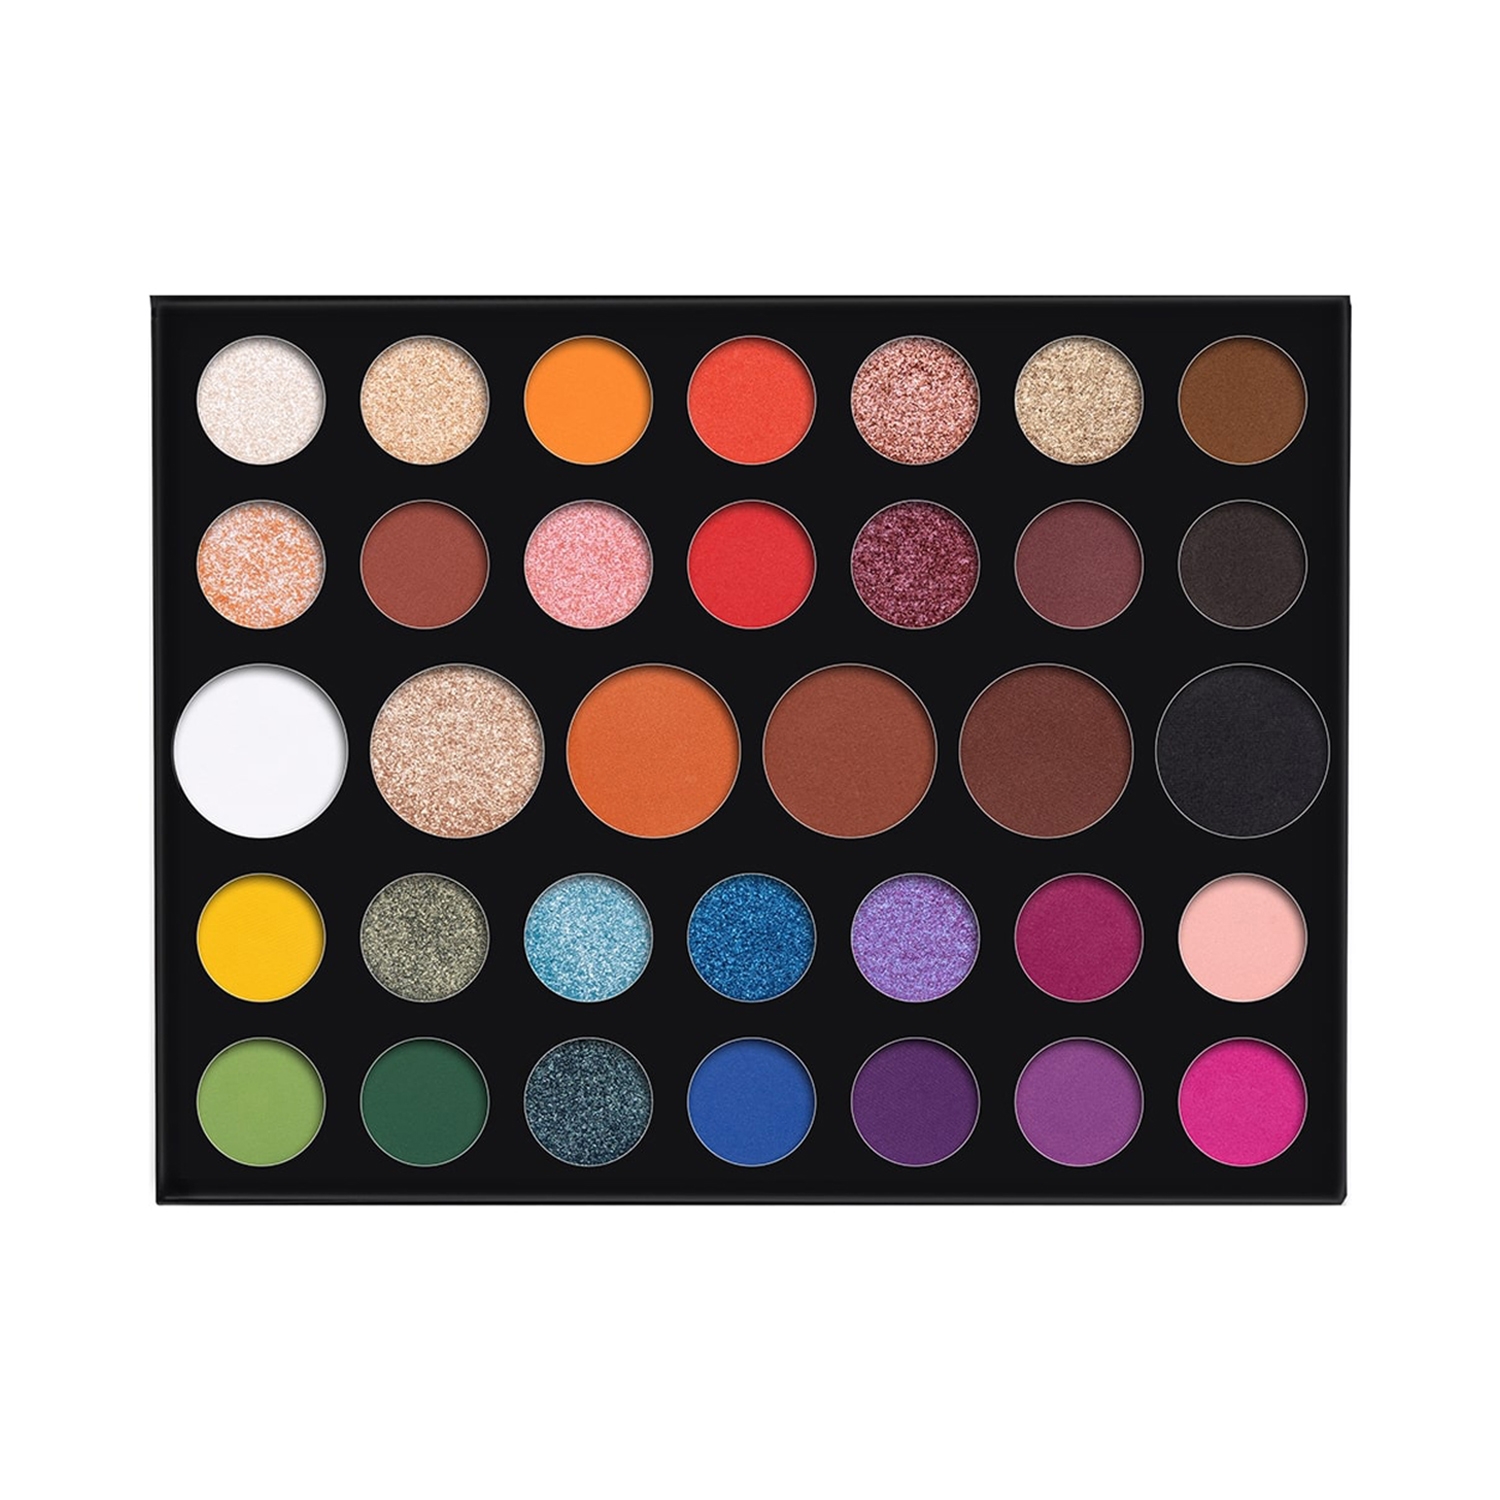 Daily Life Forever52 | Daily Life Forever52 Infinite 34 Color Eyeshadow Palette IEB001 - Multi Color (70.2g)